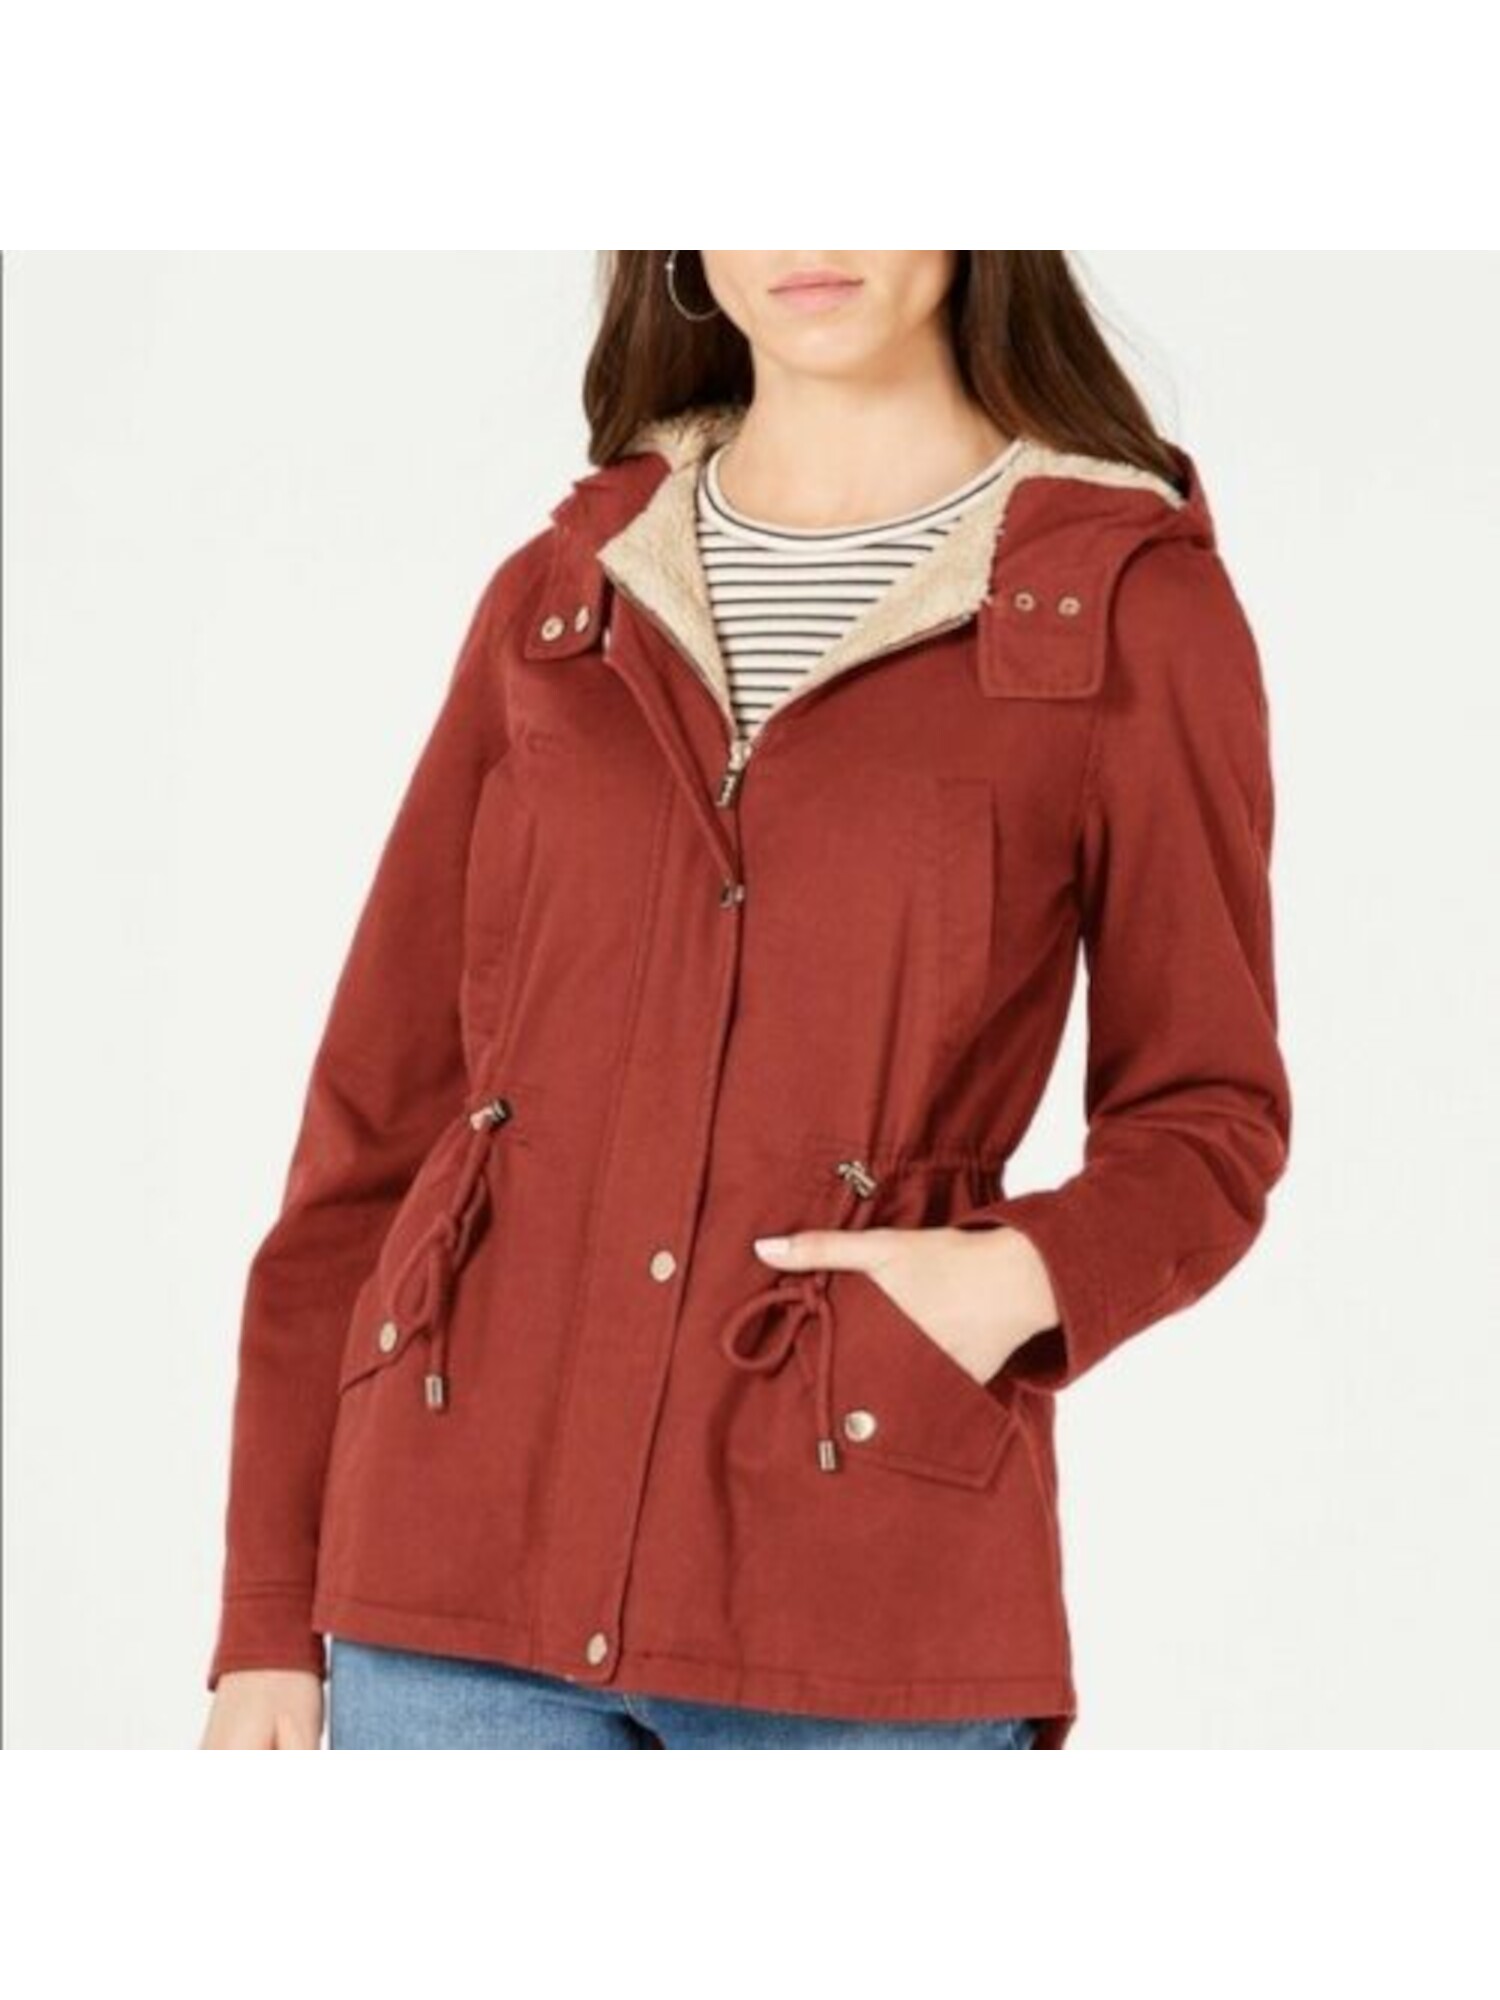 COLLECTIONB Womens Red Pocketed Zippered Hooded Anorak Button Down Jacket XS - image 1 of 3